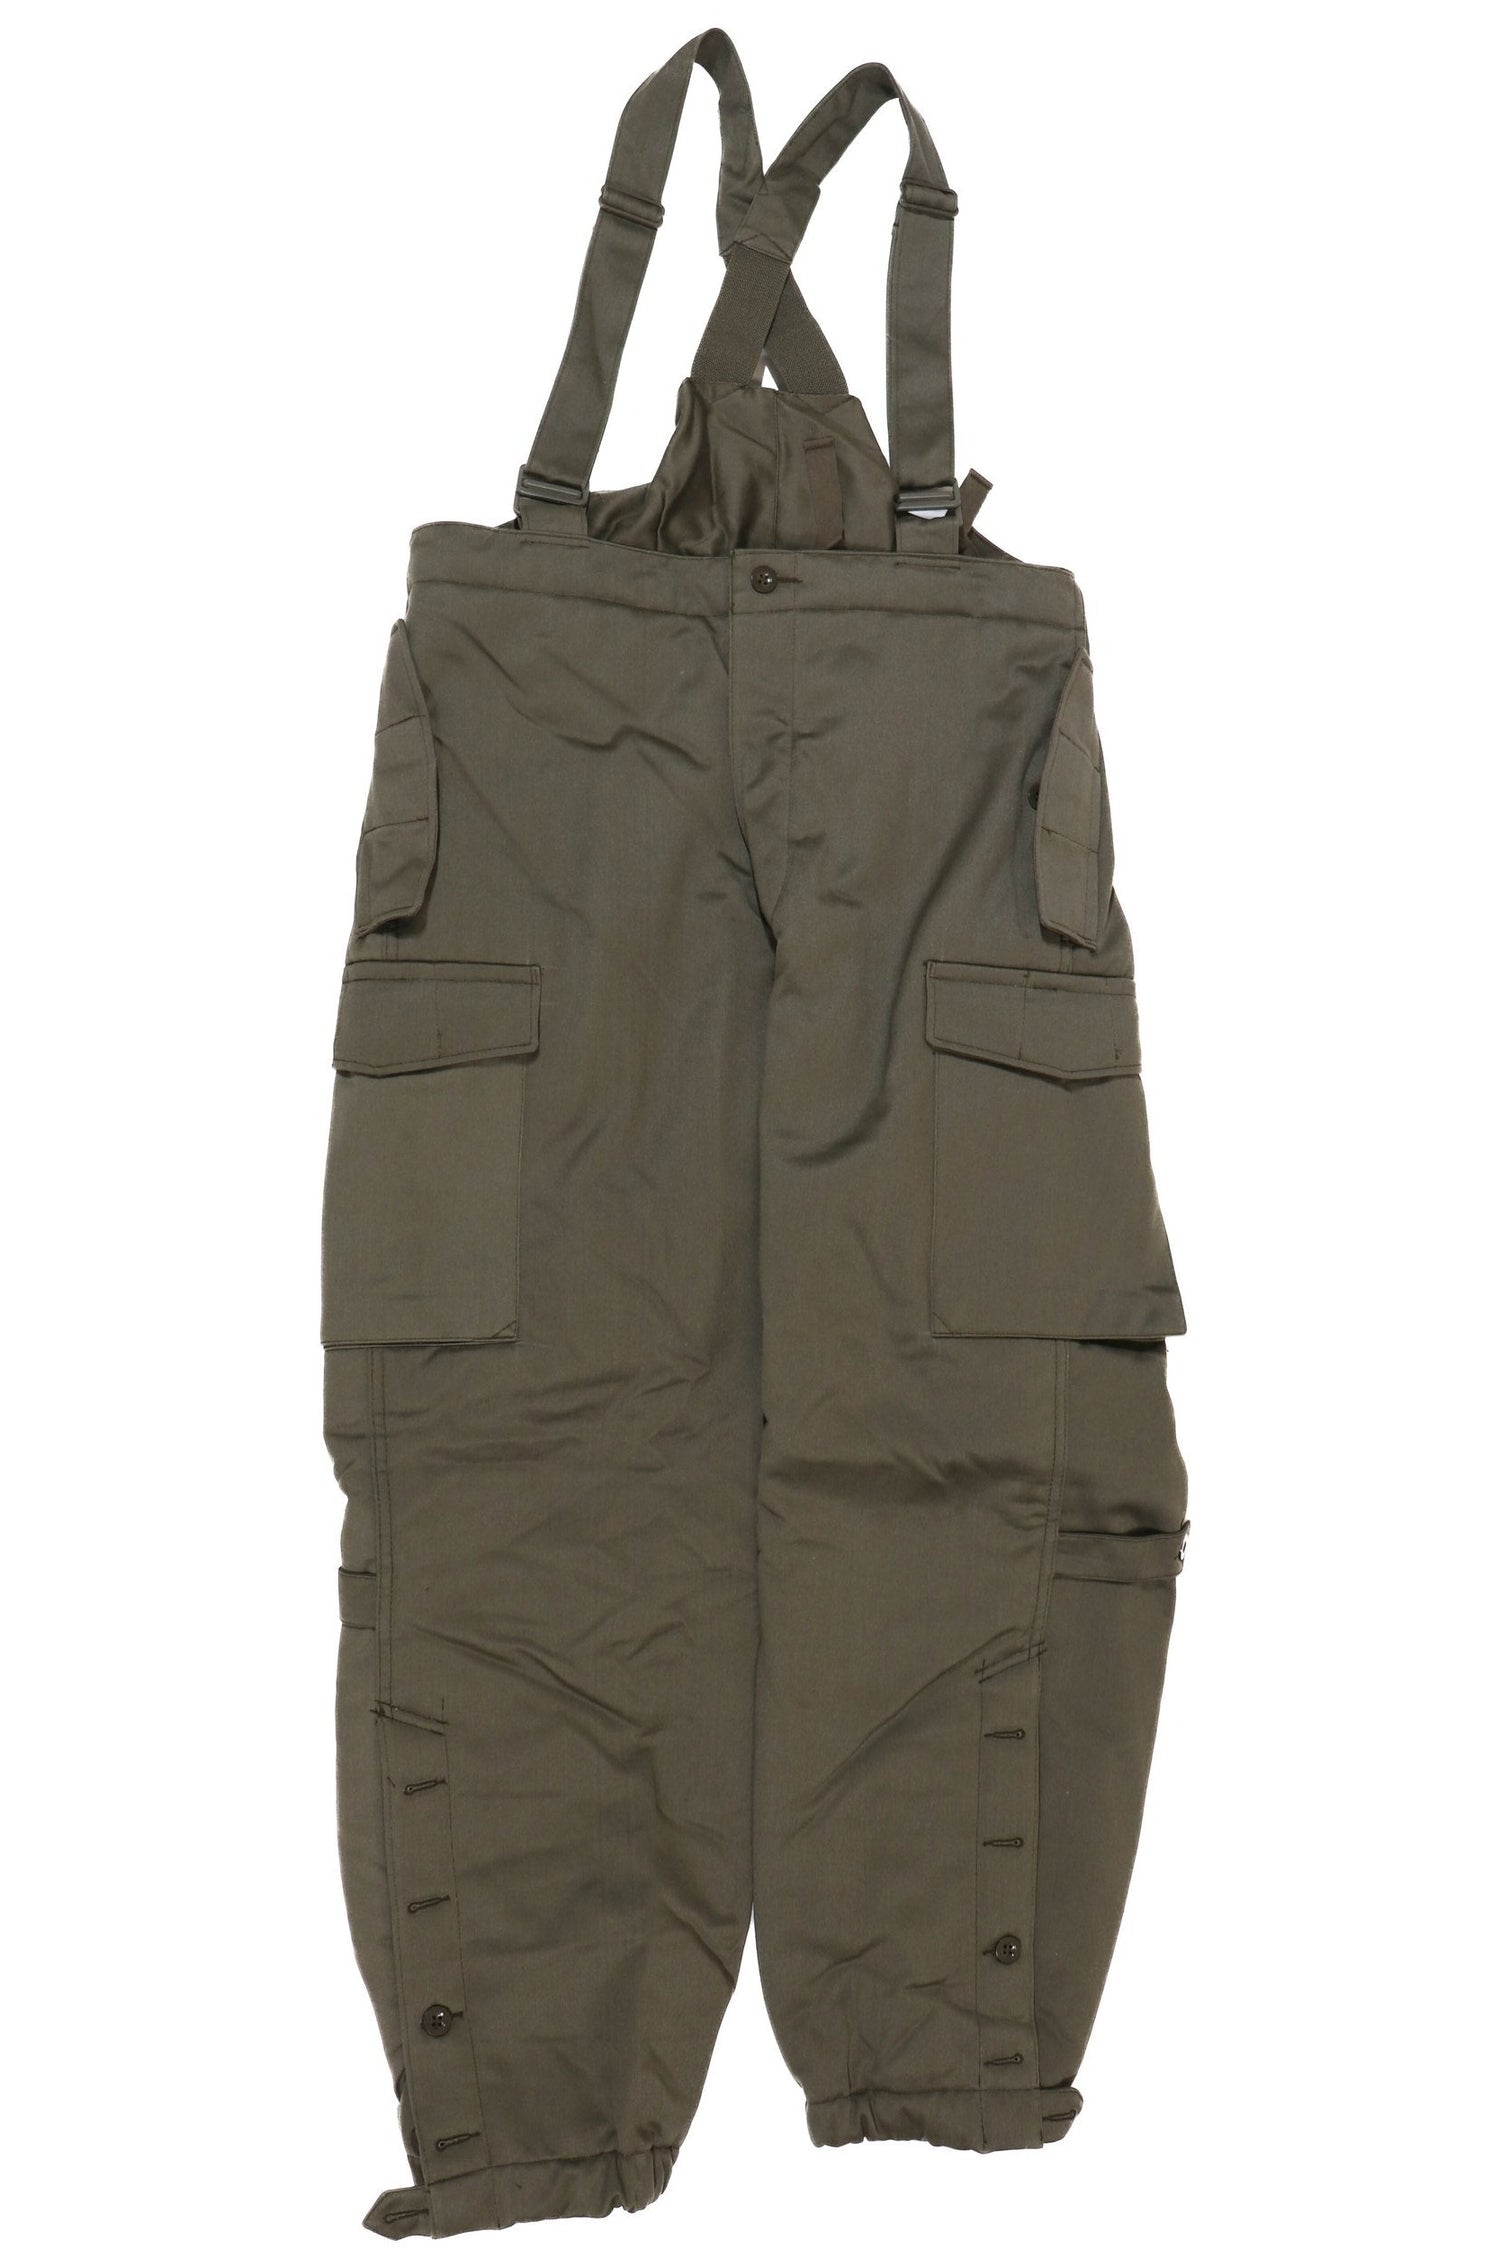 Austrian Army Insulated Winter Pants with Suspenders